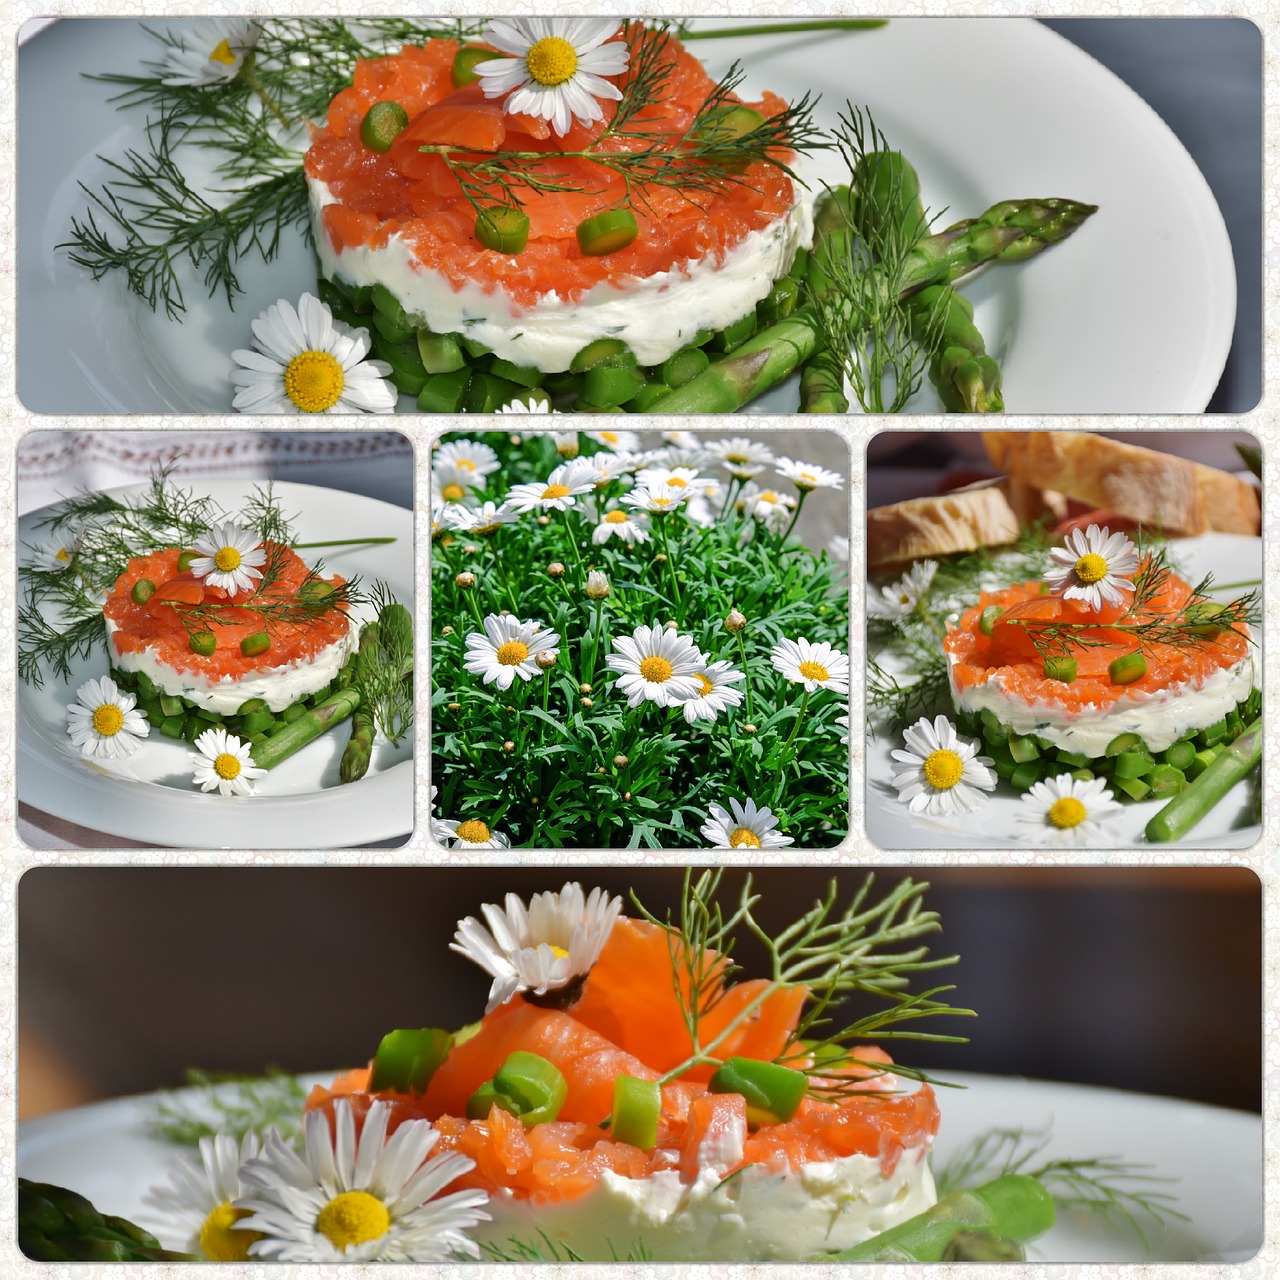 Smoked Salmon and Asparagus Quiche